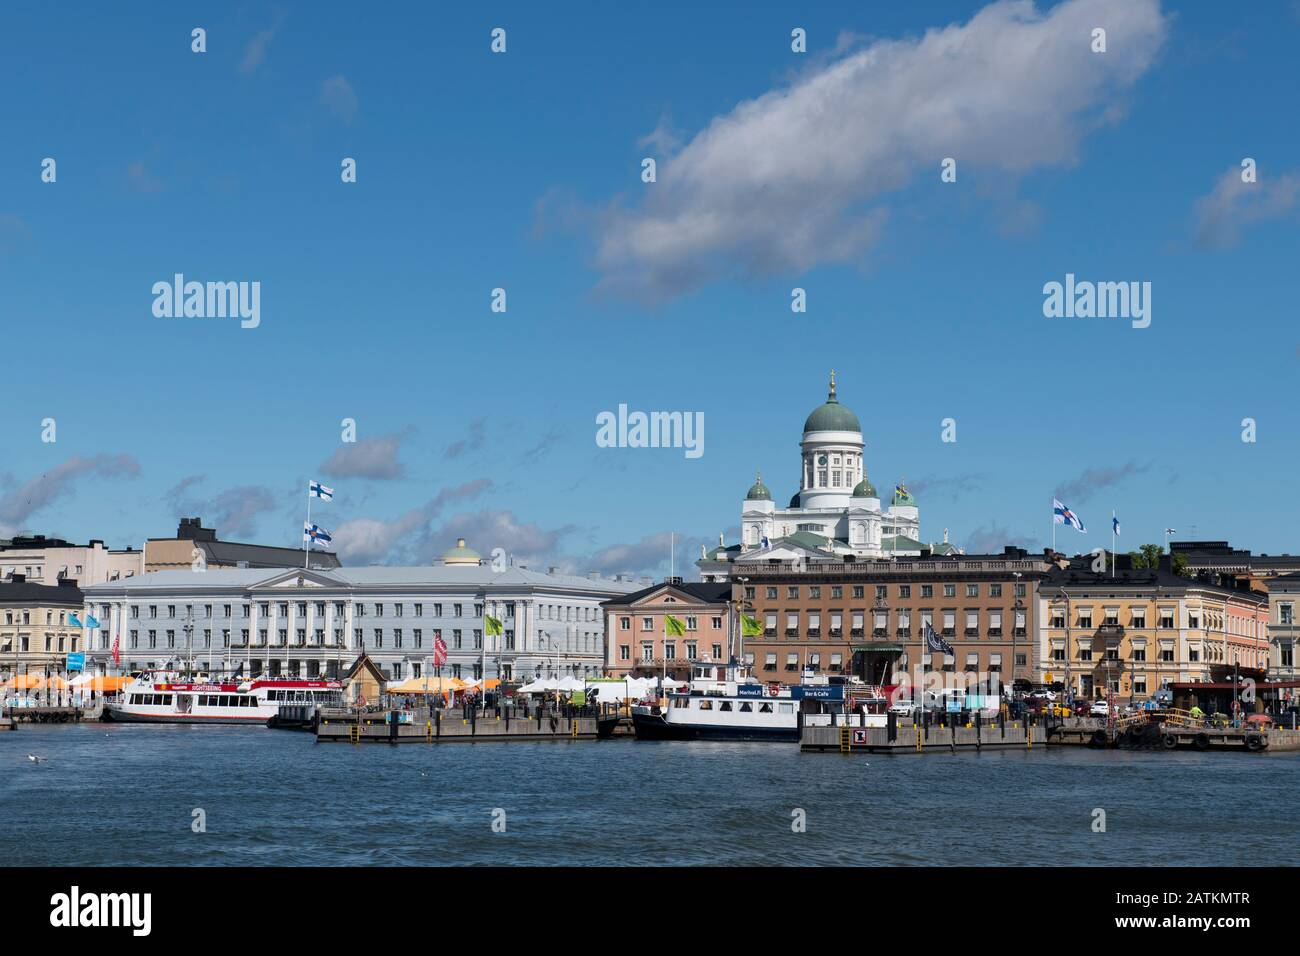 Finland, capital city of Helsinki. South Harbour pier and waterfront area with Market Square. Sightseeing boats in harbor. Stock Photo